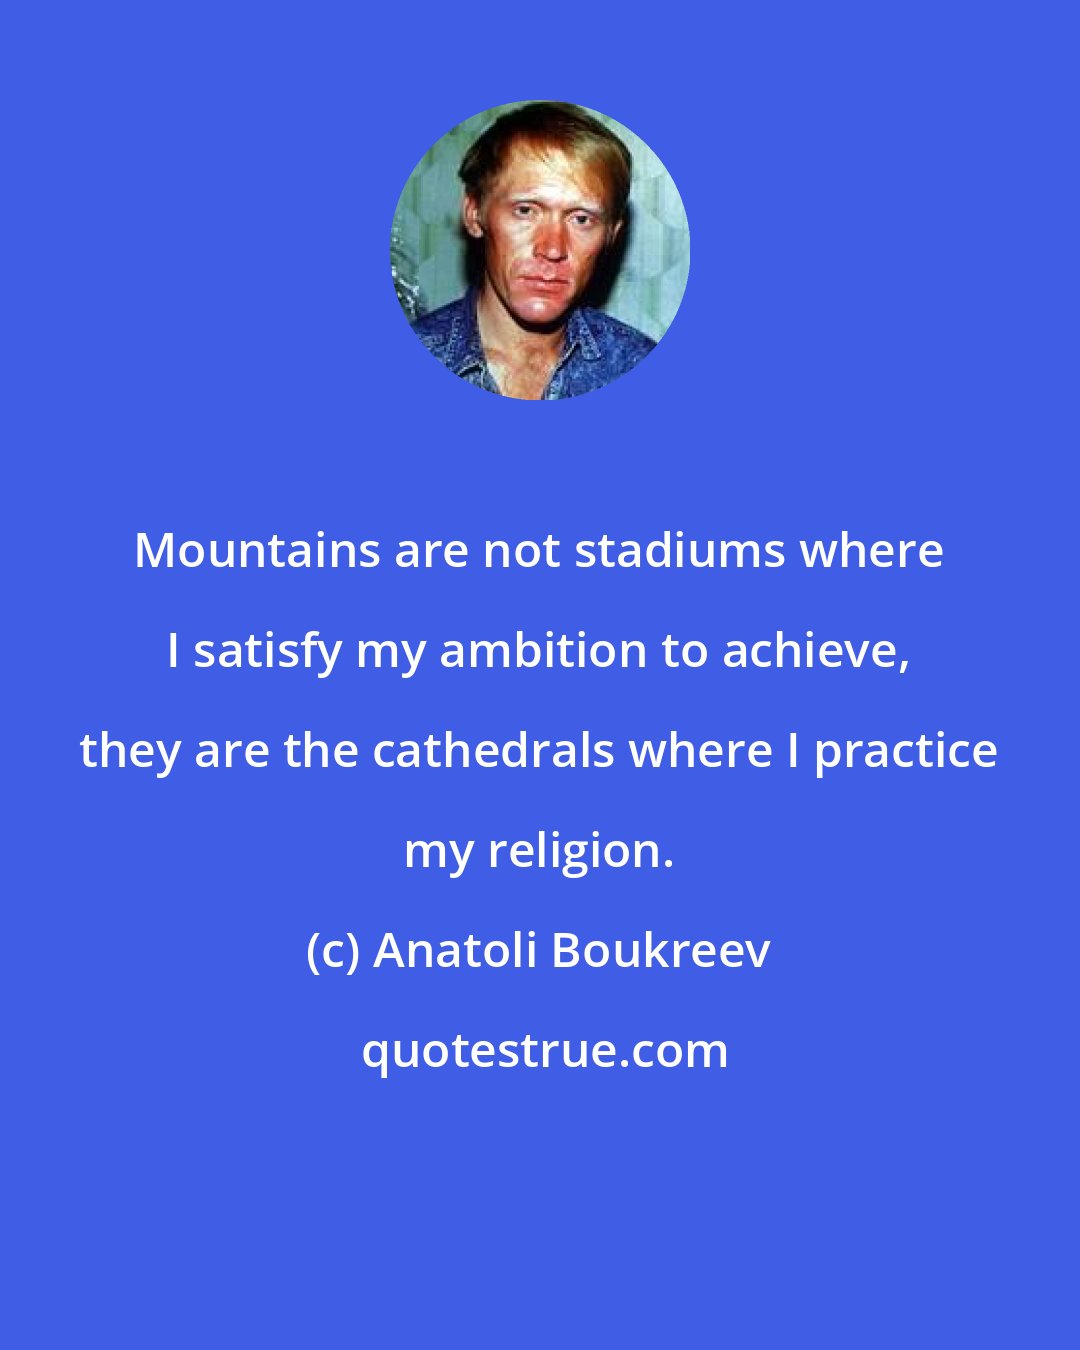 Anatoli Boukreev: Mountains are not stadiums where I satisfy my ambition to achieve, they are the cathedrals where I practice my religion.